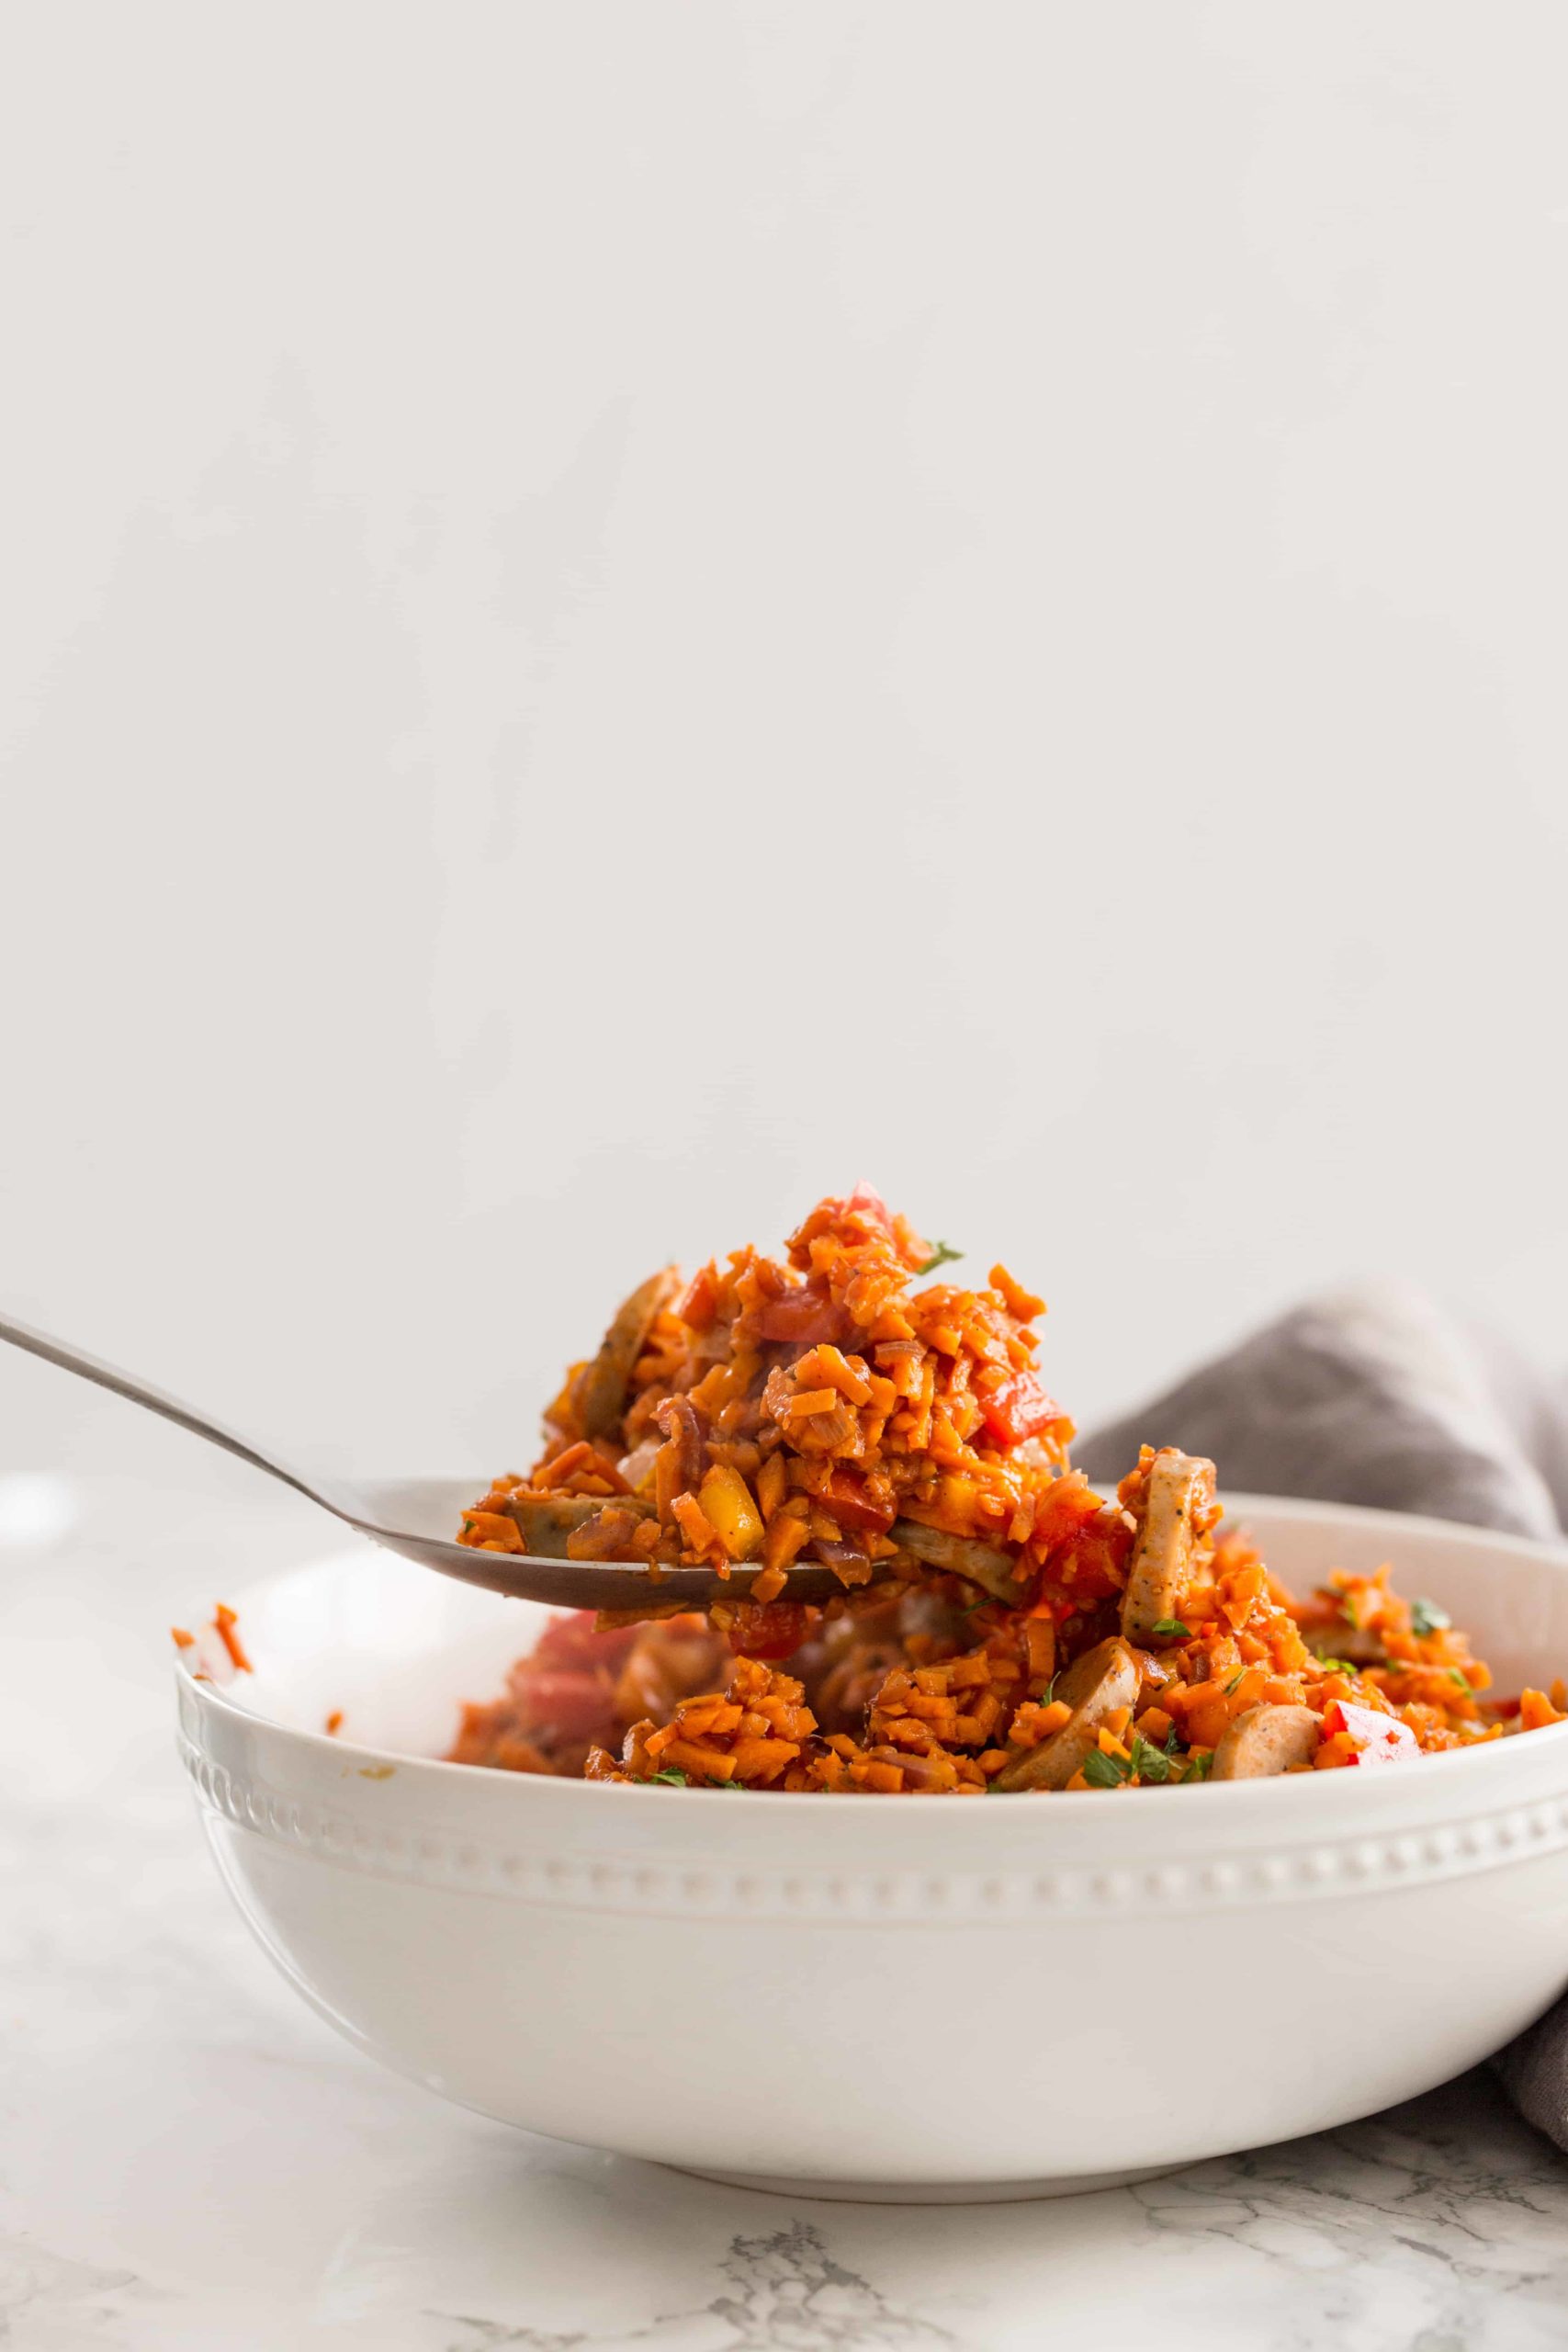 https://inspiralized.com/wp-content/uploads/2019/03/Sweet-Potato-Dirty-Rice-with-Chicken-Sausage-7-scaled.jpg